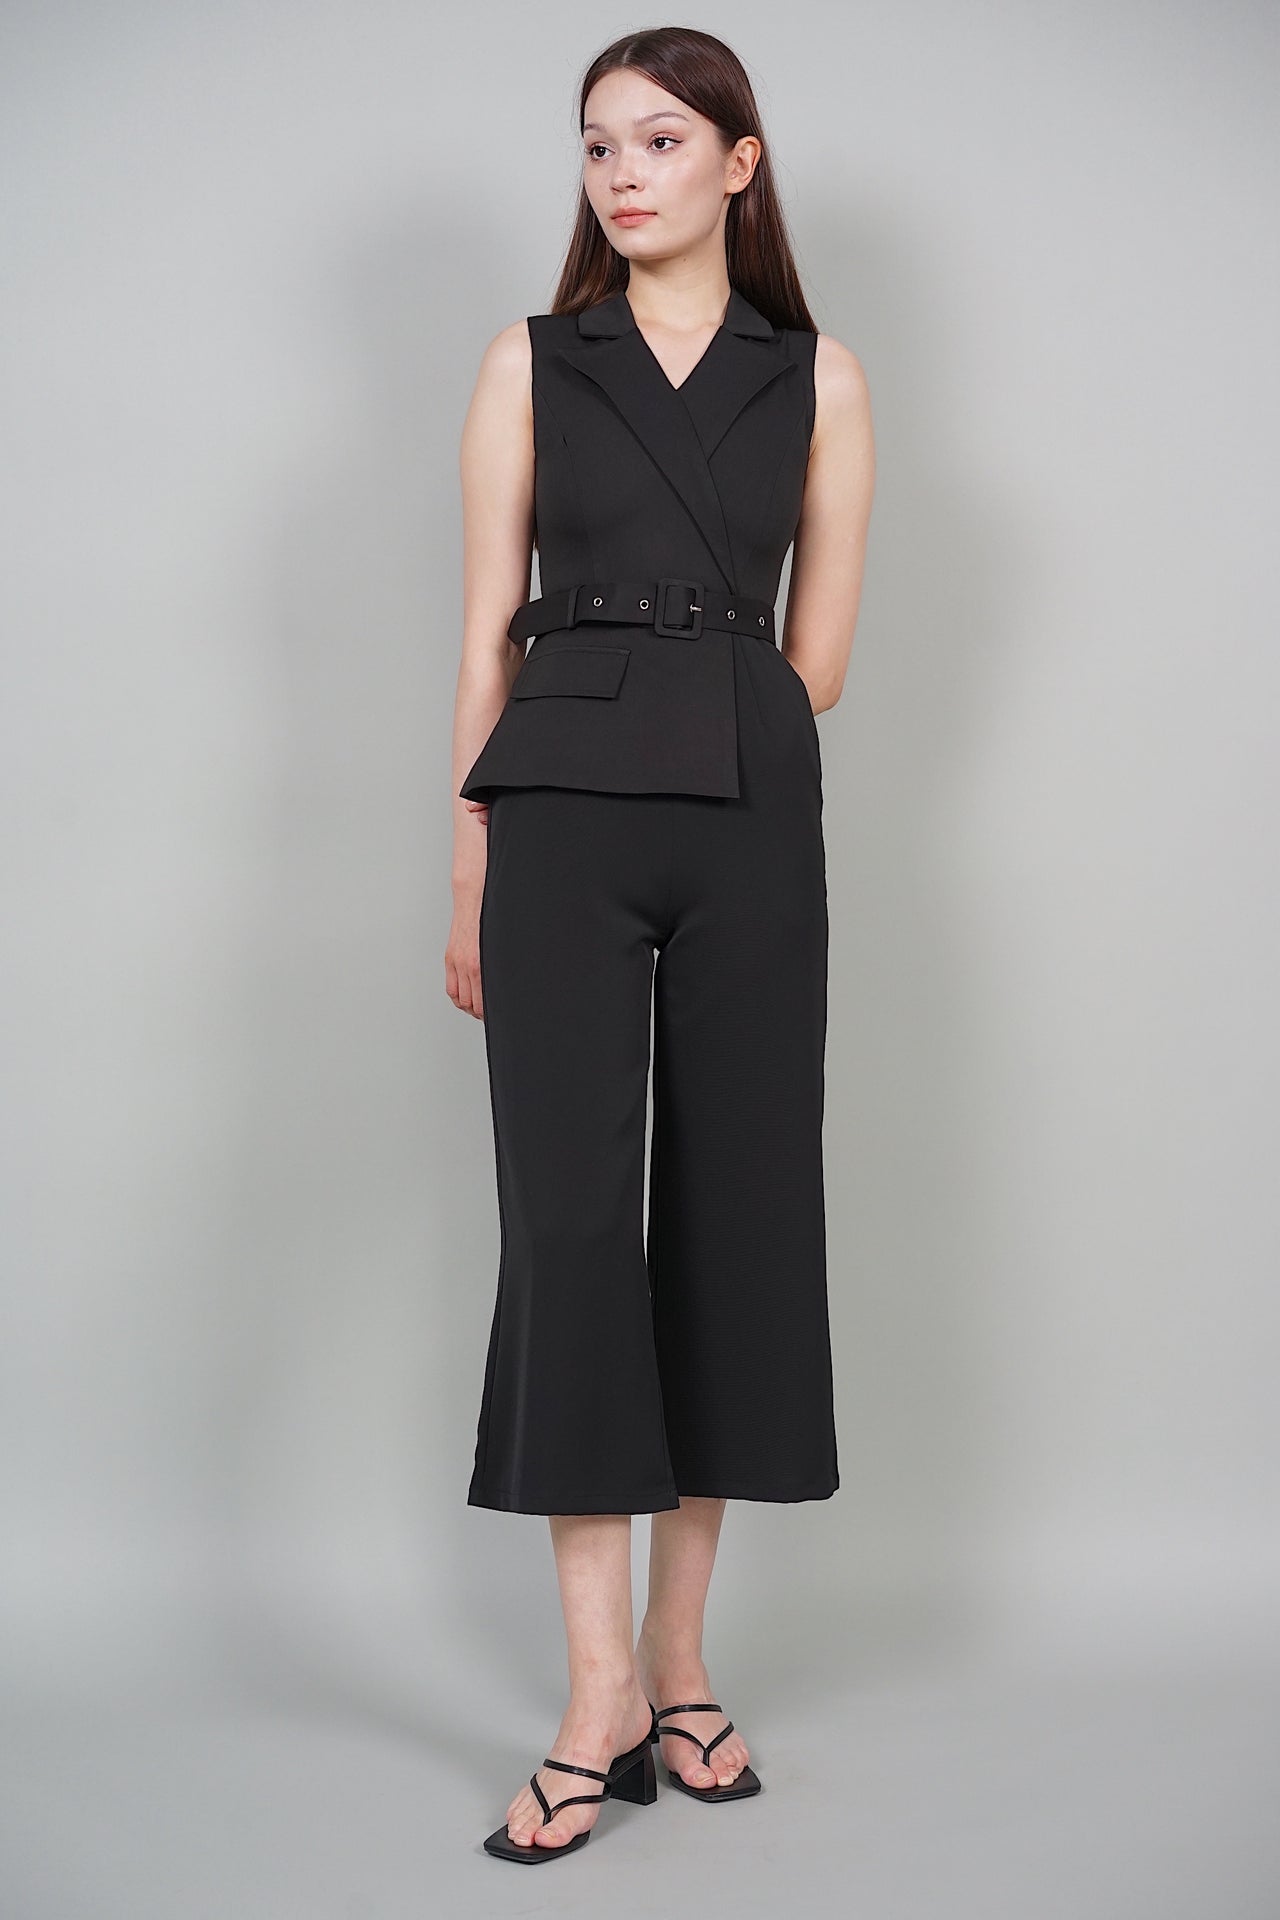 Holland Buckled Jumpsuit in Black